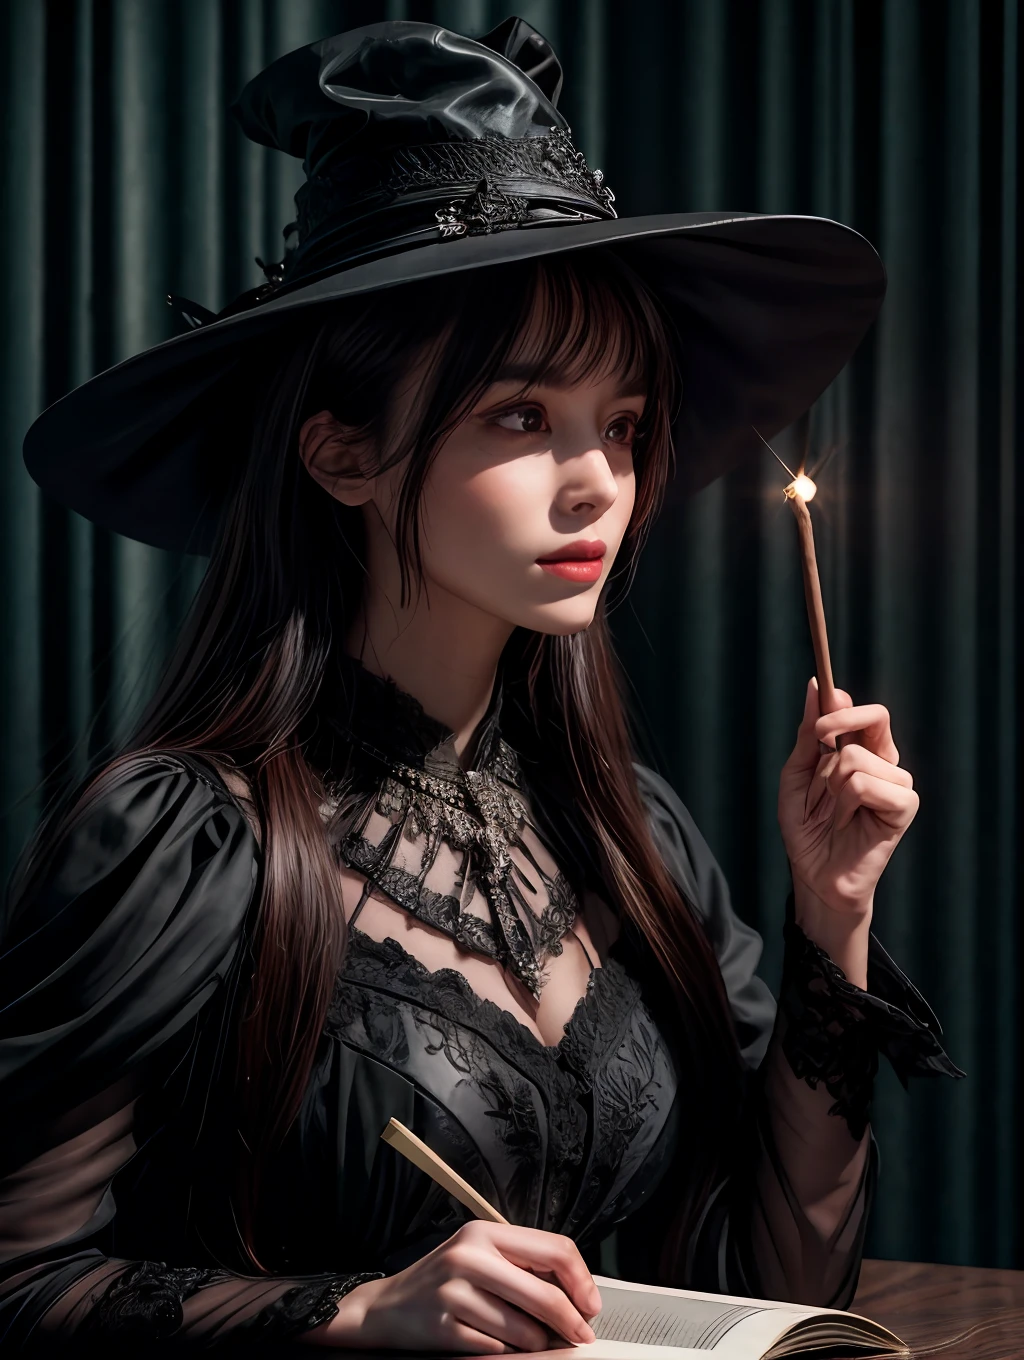 Masterpiece, best quality, realistic, high detailed, delicate and intricated, a beautiful and powerful woman, wearing a black dress, high hat, carrying an open stick and book, as if casting a spell to cast her magic, being in a dark place, and the light comes from the book shining on her face, low light, low key, light to the face, deep shadow, cinematic lighting